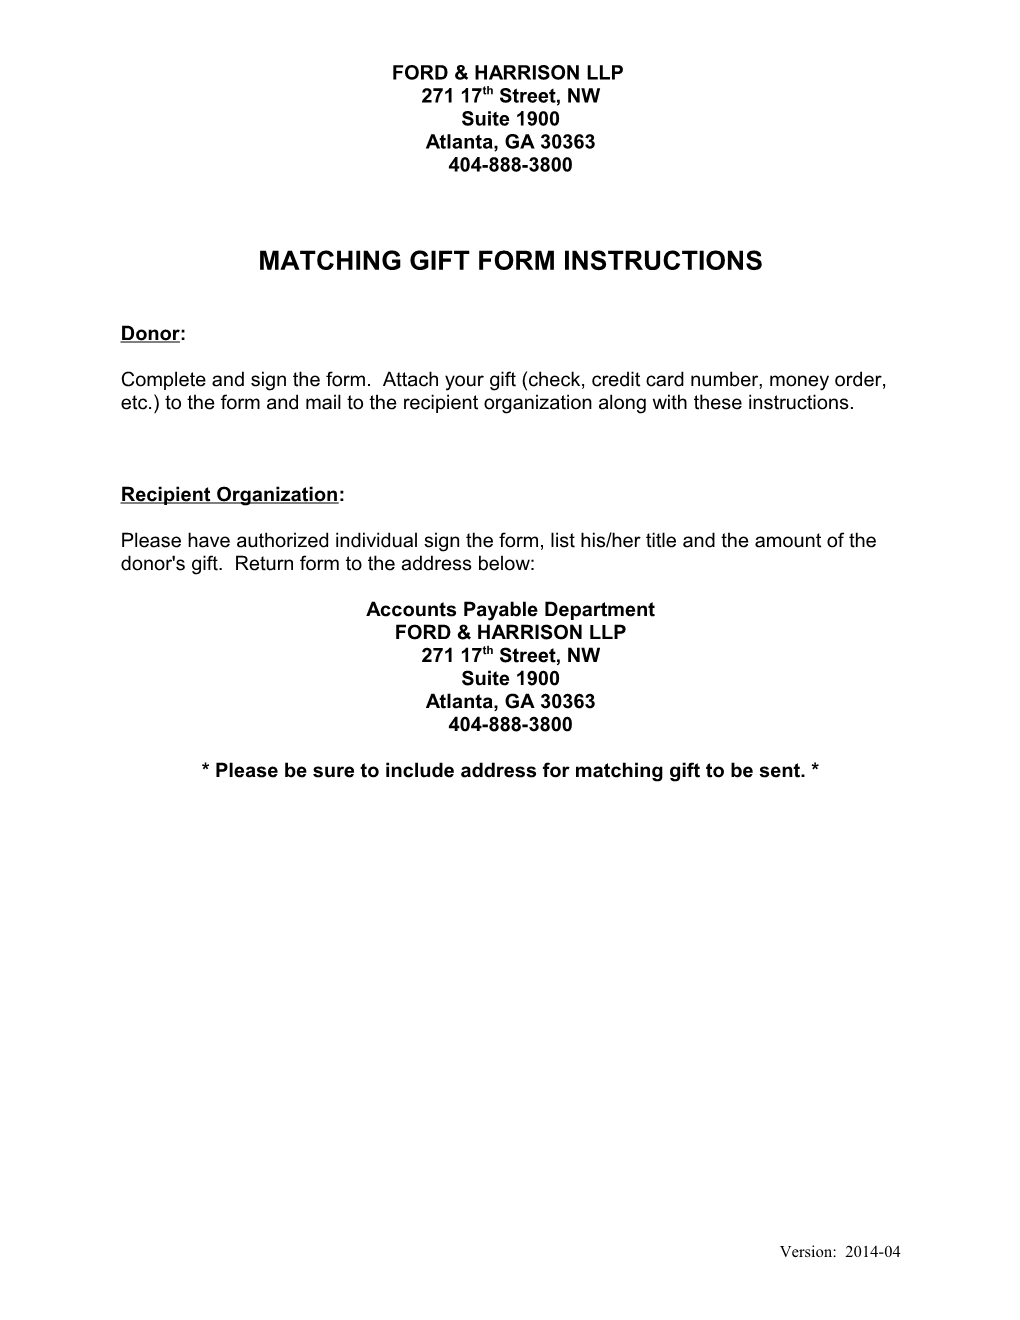 Matching Gift Form Instructions